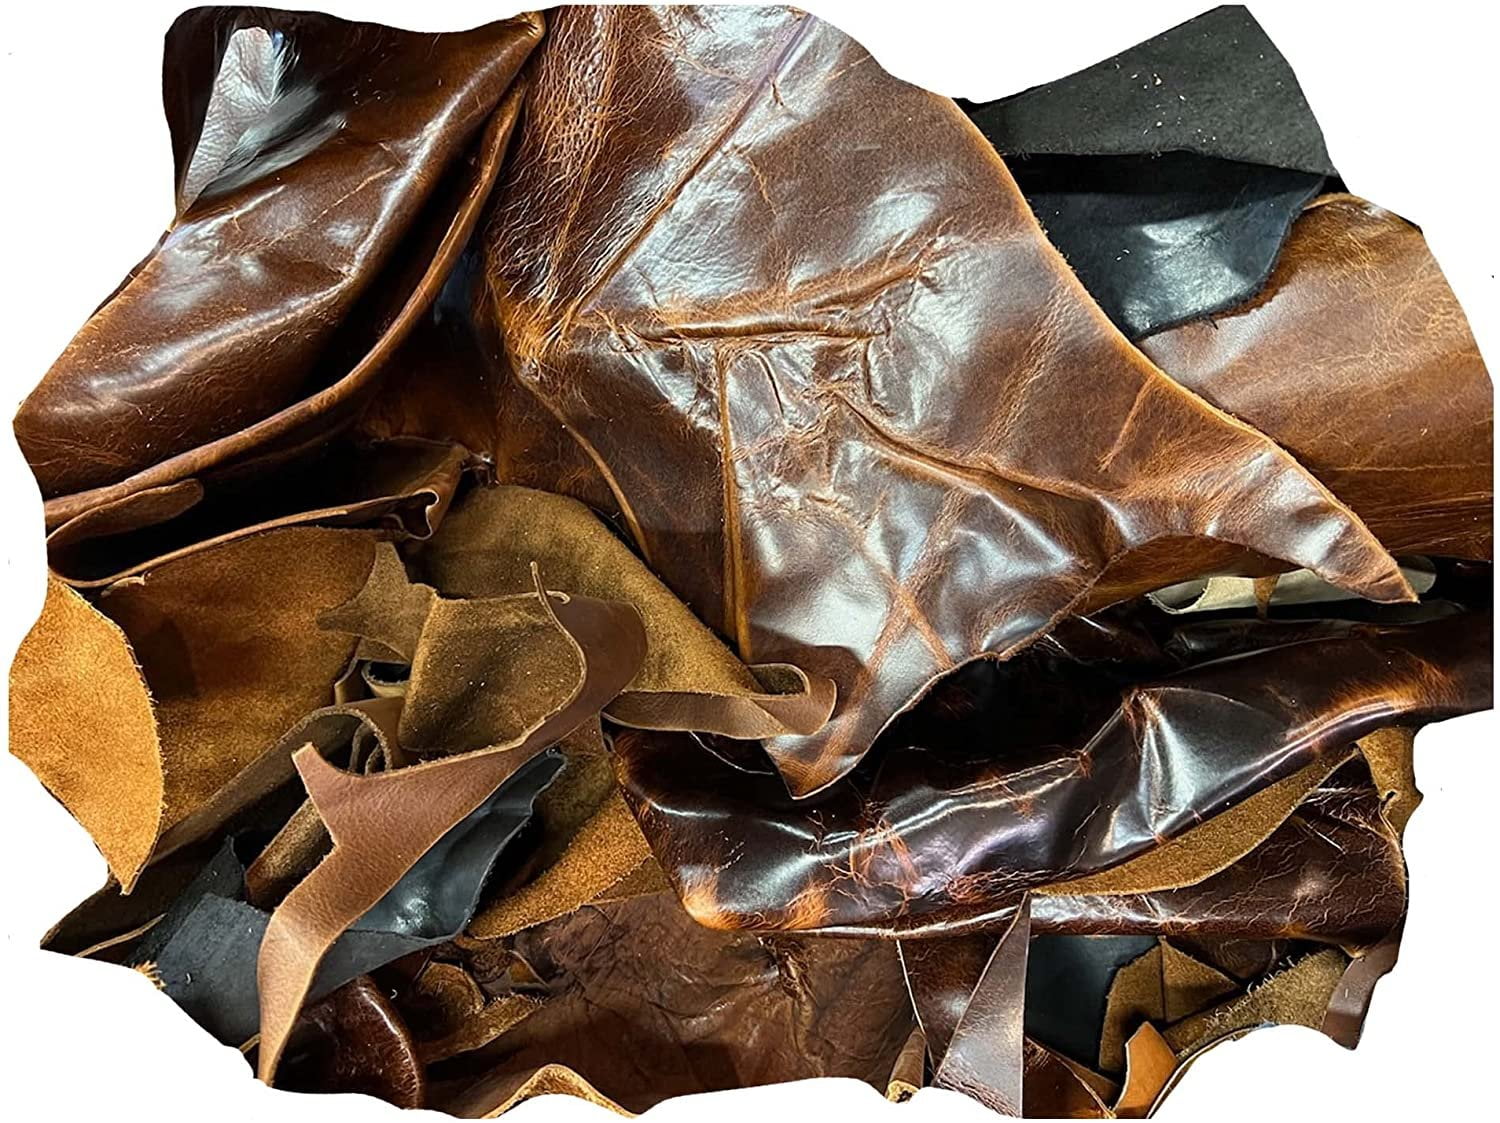 ELW 4-6 oz. 1.8-2.4mm Thickness, 1 LB Vegetable Tanned Leather Scraps,  Mixed Whiskey, Cowhide Remnants Full Grain Leather for Tooling, Holsters,  Knife Sheath, Carving, Embossing, Stamping 